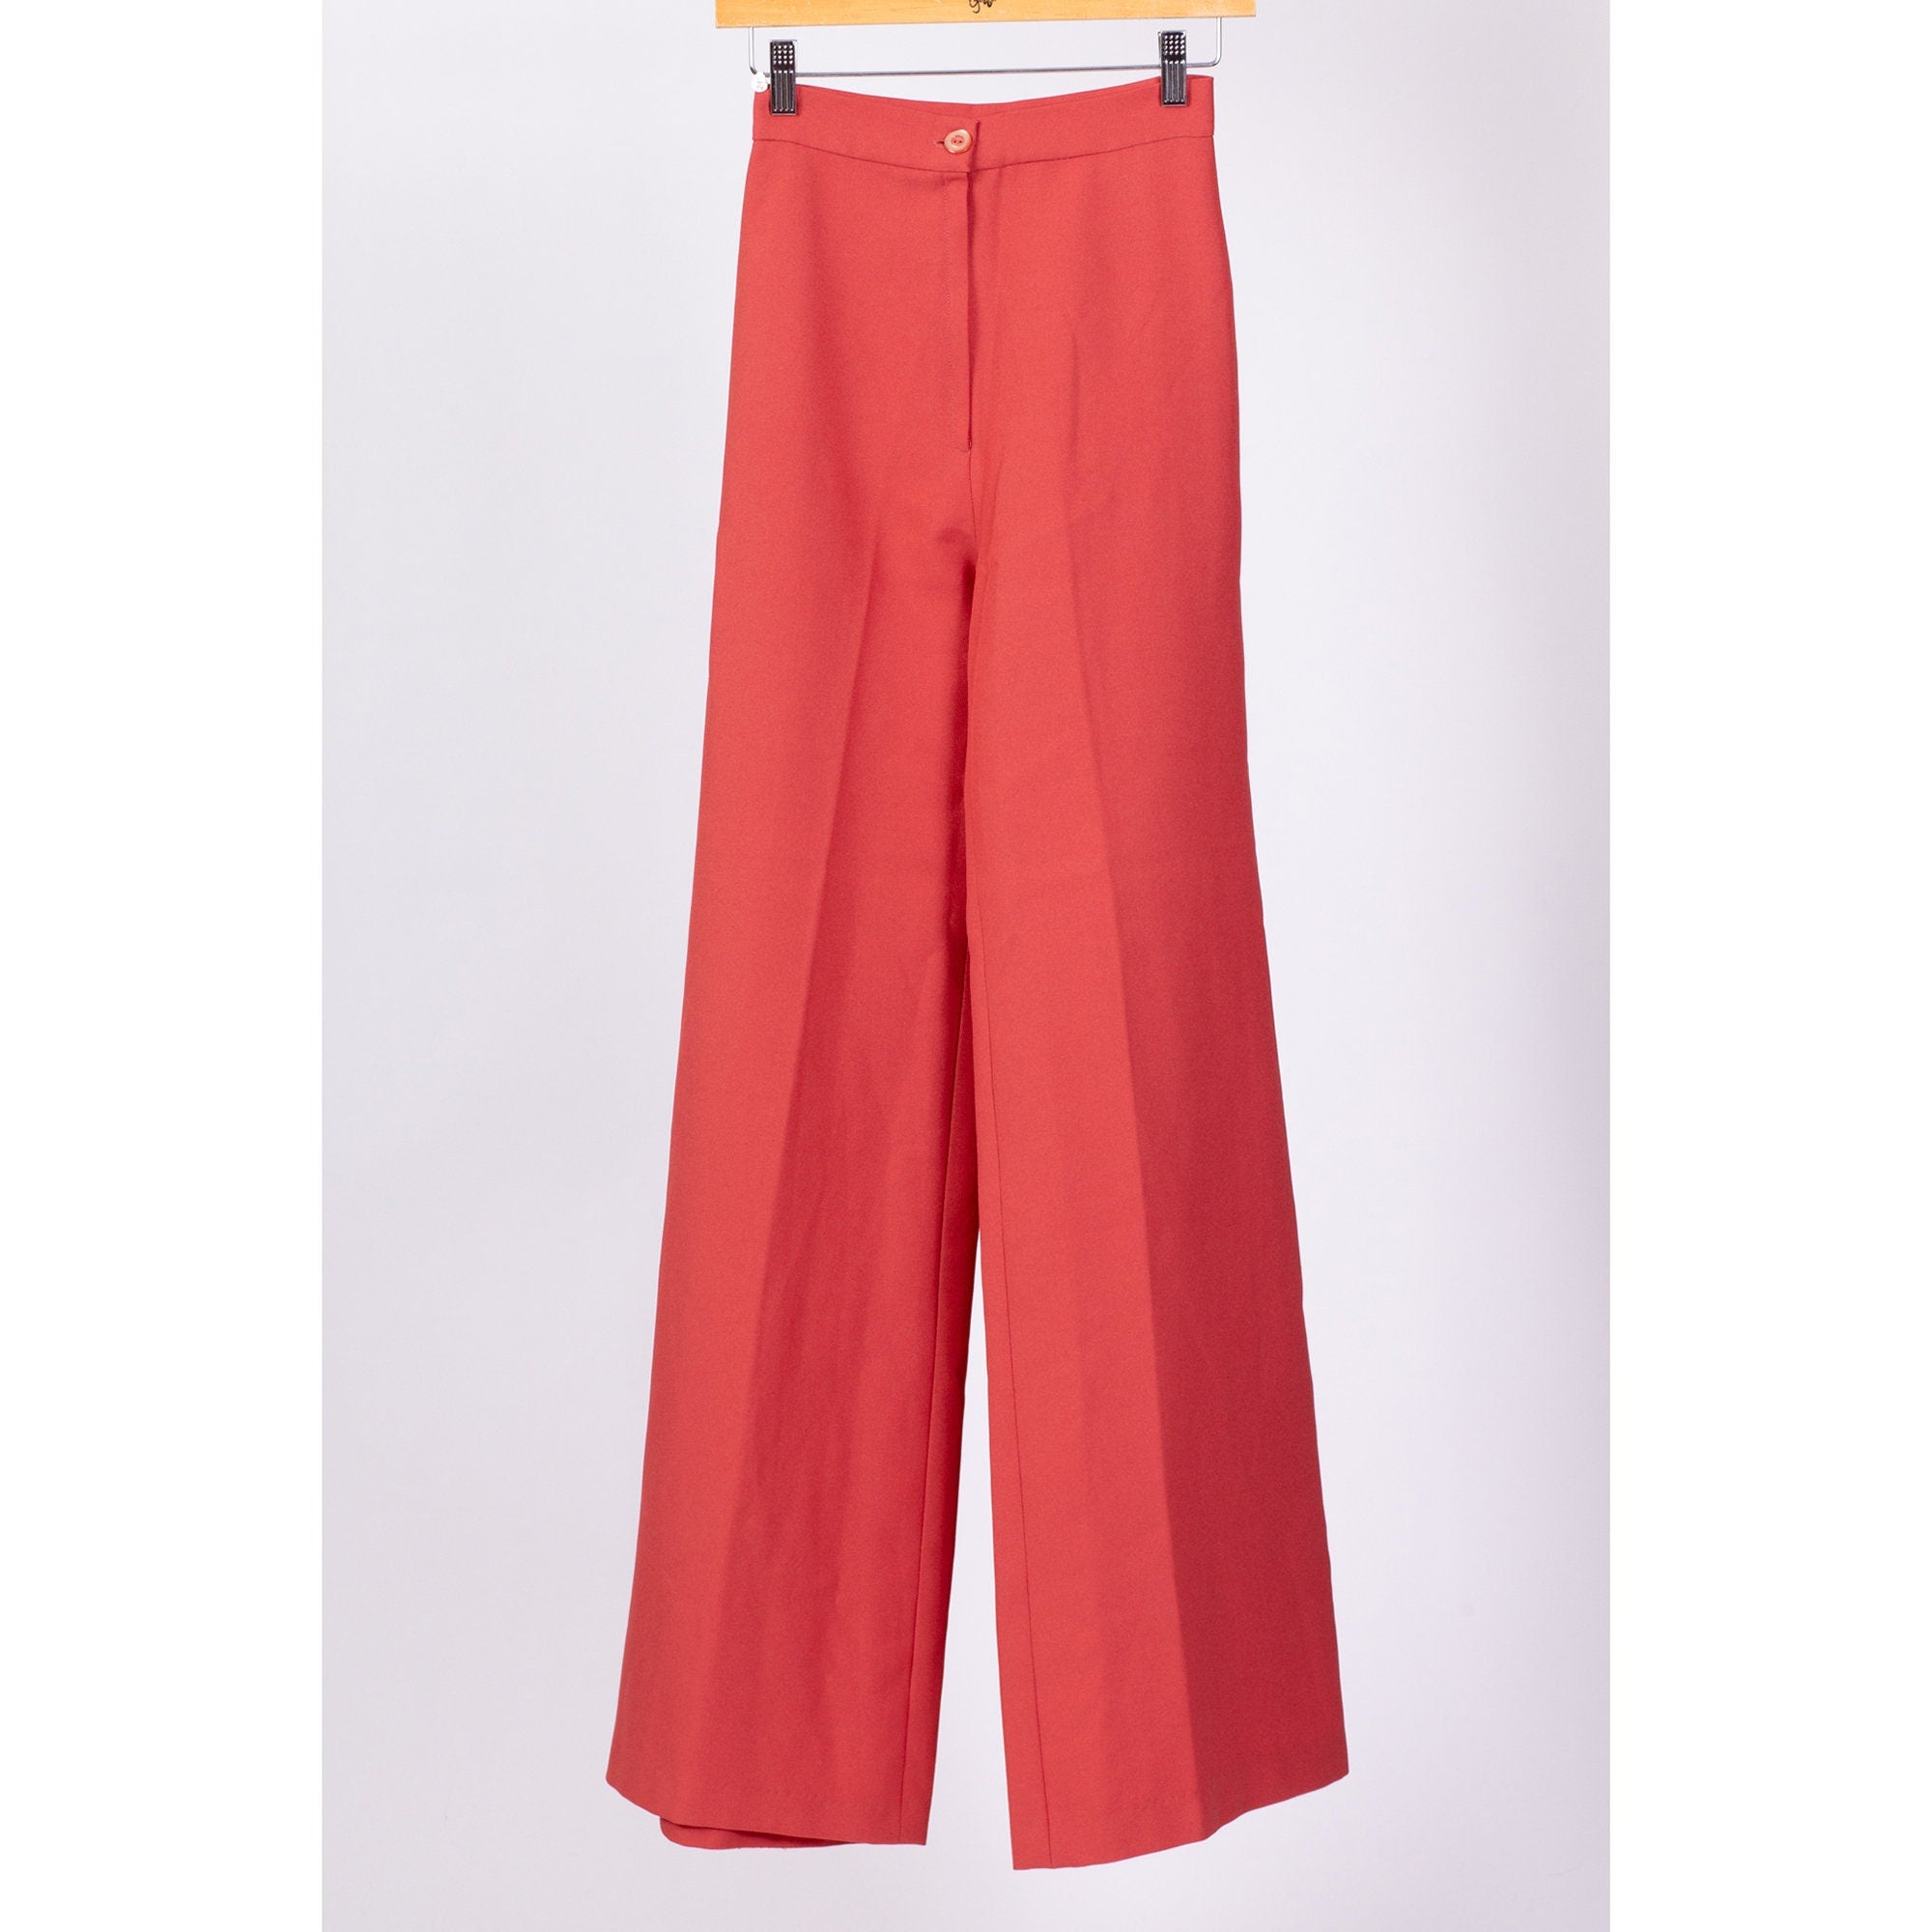 70s Salmon Pink High Waisted Flared Pants - Extra Small, 23.5 